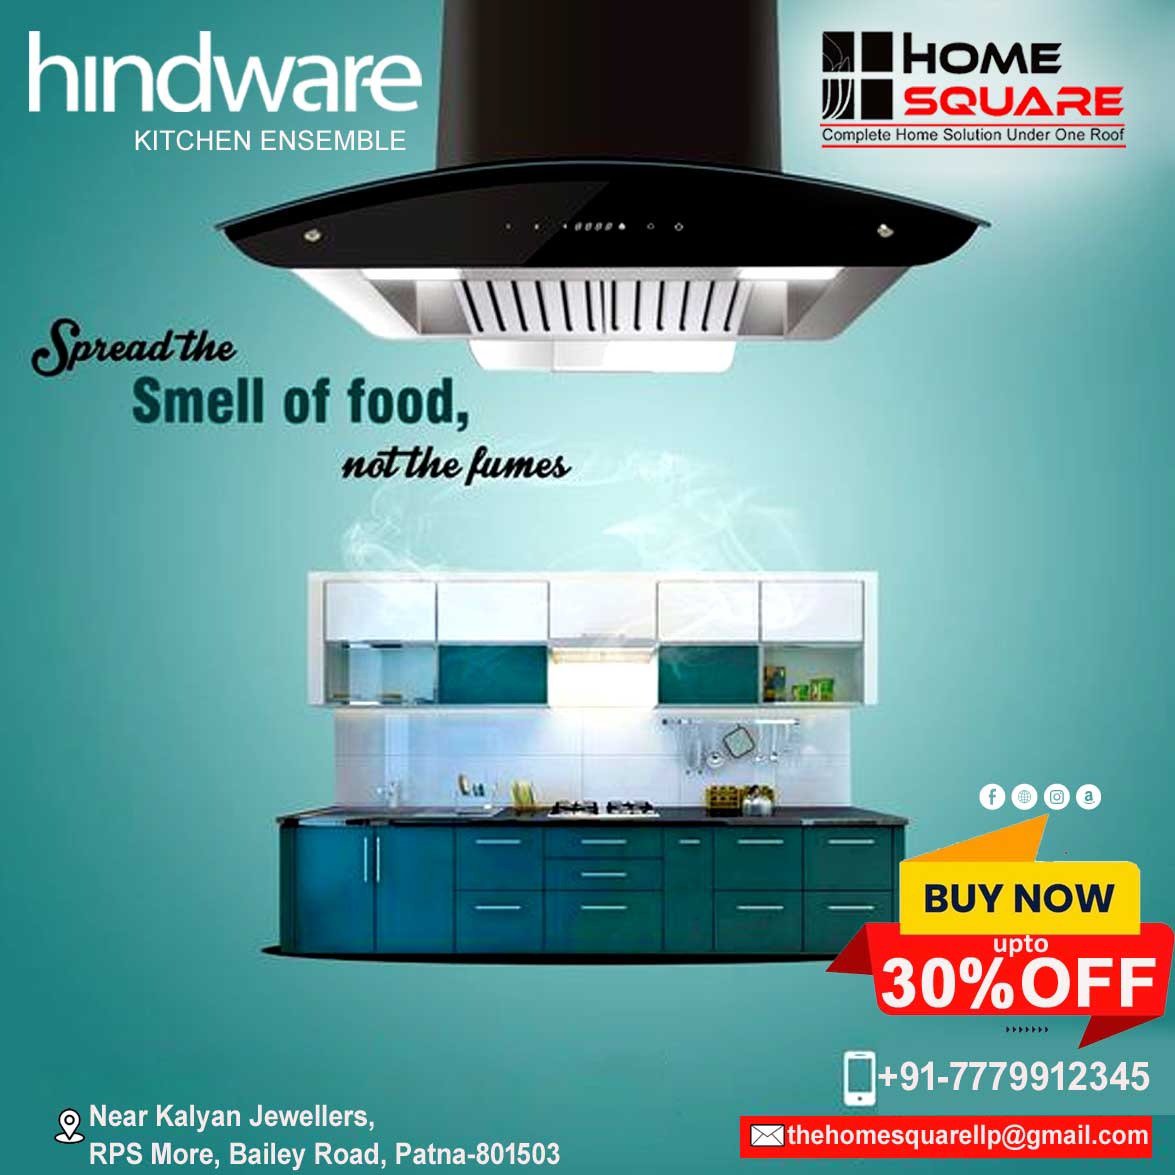 Why choose Hindware Chimney?

🔥 Powerful Suction
🌬️ Advanced Filtration

💡 Sleek Design
Don't miss out on this incredible opportunity to get your hands on a Hindware Chimney at a whopping 30% discount! 
👉 Contact us: +91 7779912345
maps.app.goo.gl/9shnCC5SLhuRLT…

#HindwareChimney